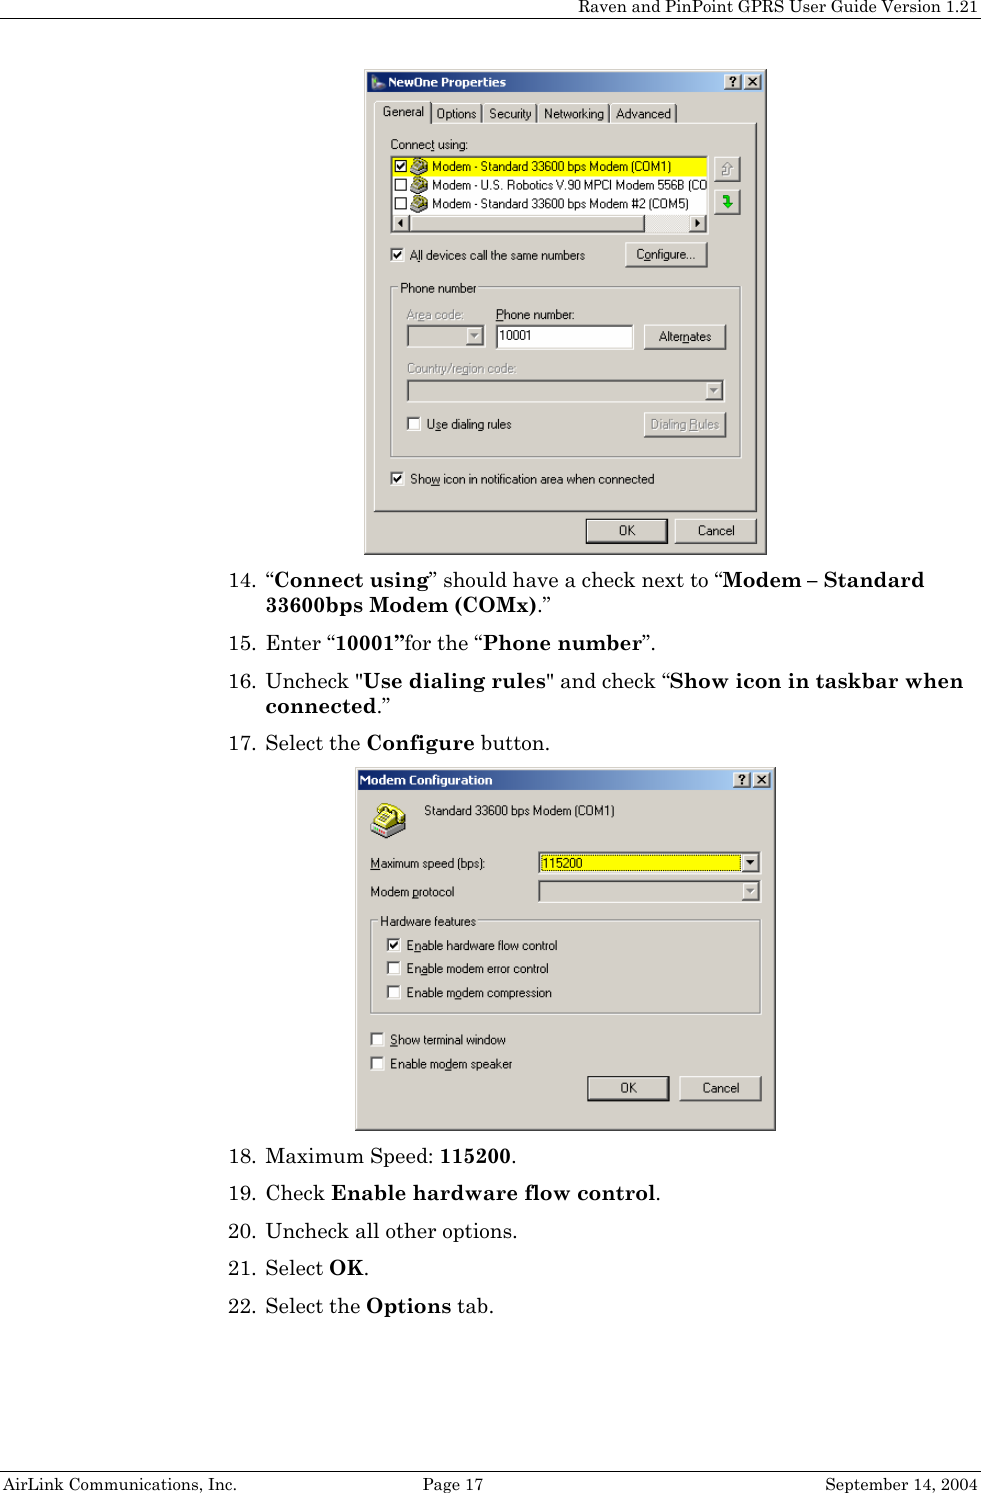 Raven and PinPoint GPRS User Guide Version 1.21  14. “Connect using” should have a check next to “Modem – Standard 33600bps Modem (COMx).” 15. Enter “10001”for the “Phone number”. 16. Uncheck &quot;Use dialing rules&quot; and check “Show icon in taskbar when connected.” 17. Select the Configure button.  18. Maximum Speed: 115200. 19. Check Enable hardware flow control. 20. Uncheck all other options. 21. Select OK. 22. Select the Options tab. AirLink Communications, Inc.  Page 17  September 14, 2004 